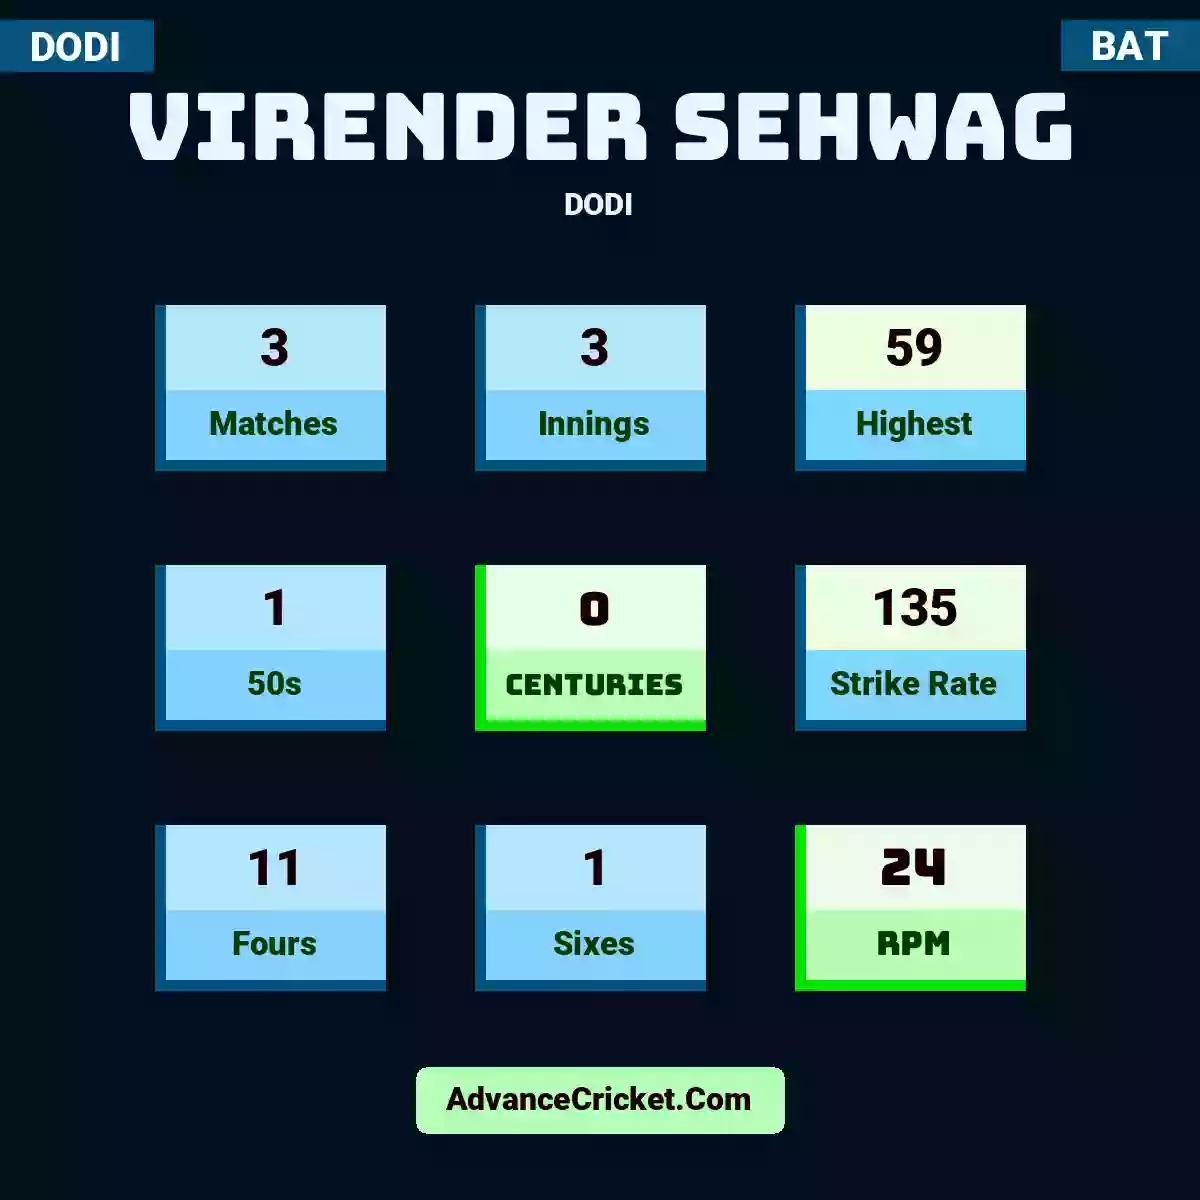 Virender Sehwag DODI , Virender Sehwag played 3 matches, scored 59 runs as highest, 1 half-centuries, and 0 centuries, with a strike rate of 135. V.Sehwag hit 11 fours and 1 sixes, with an RPM of 24.